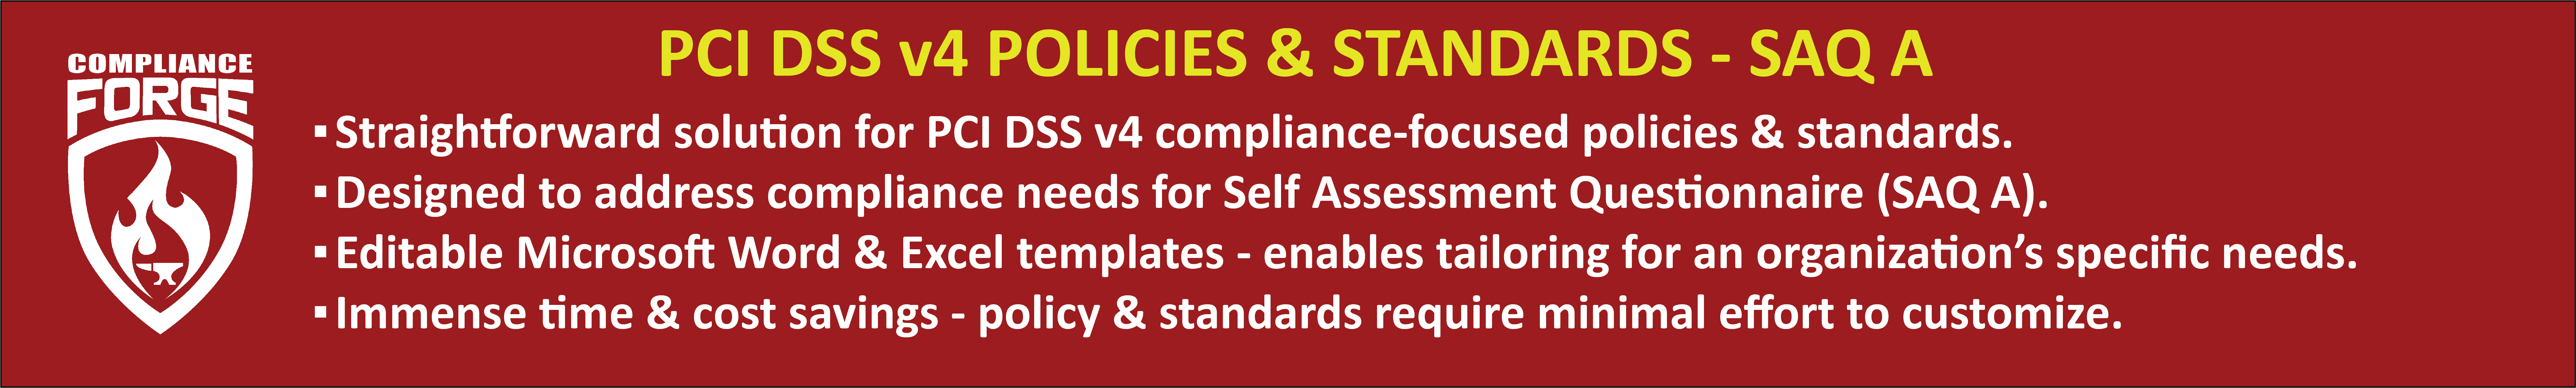 PCI DSS v4 SAQ-A policies and standards example